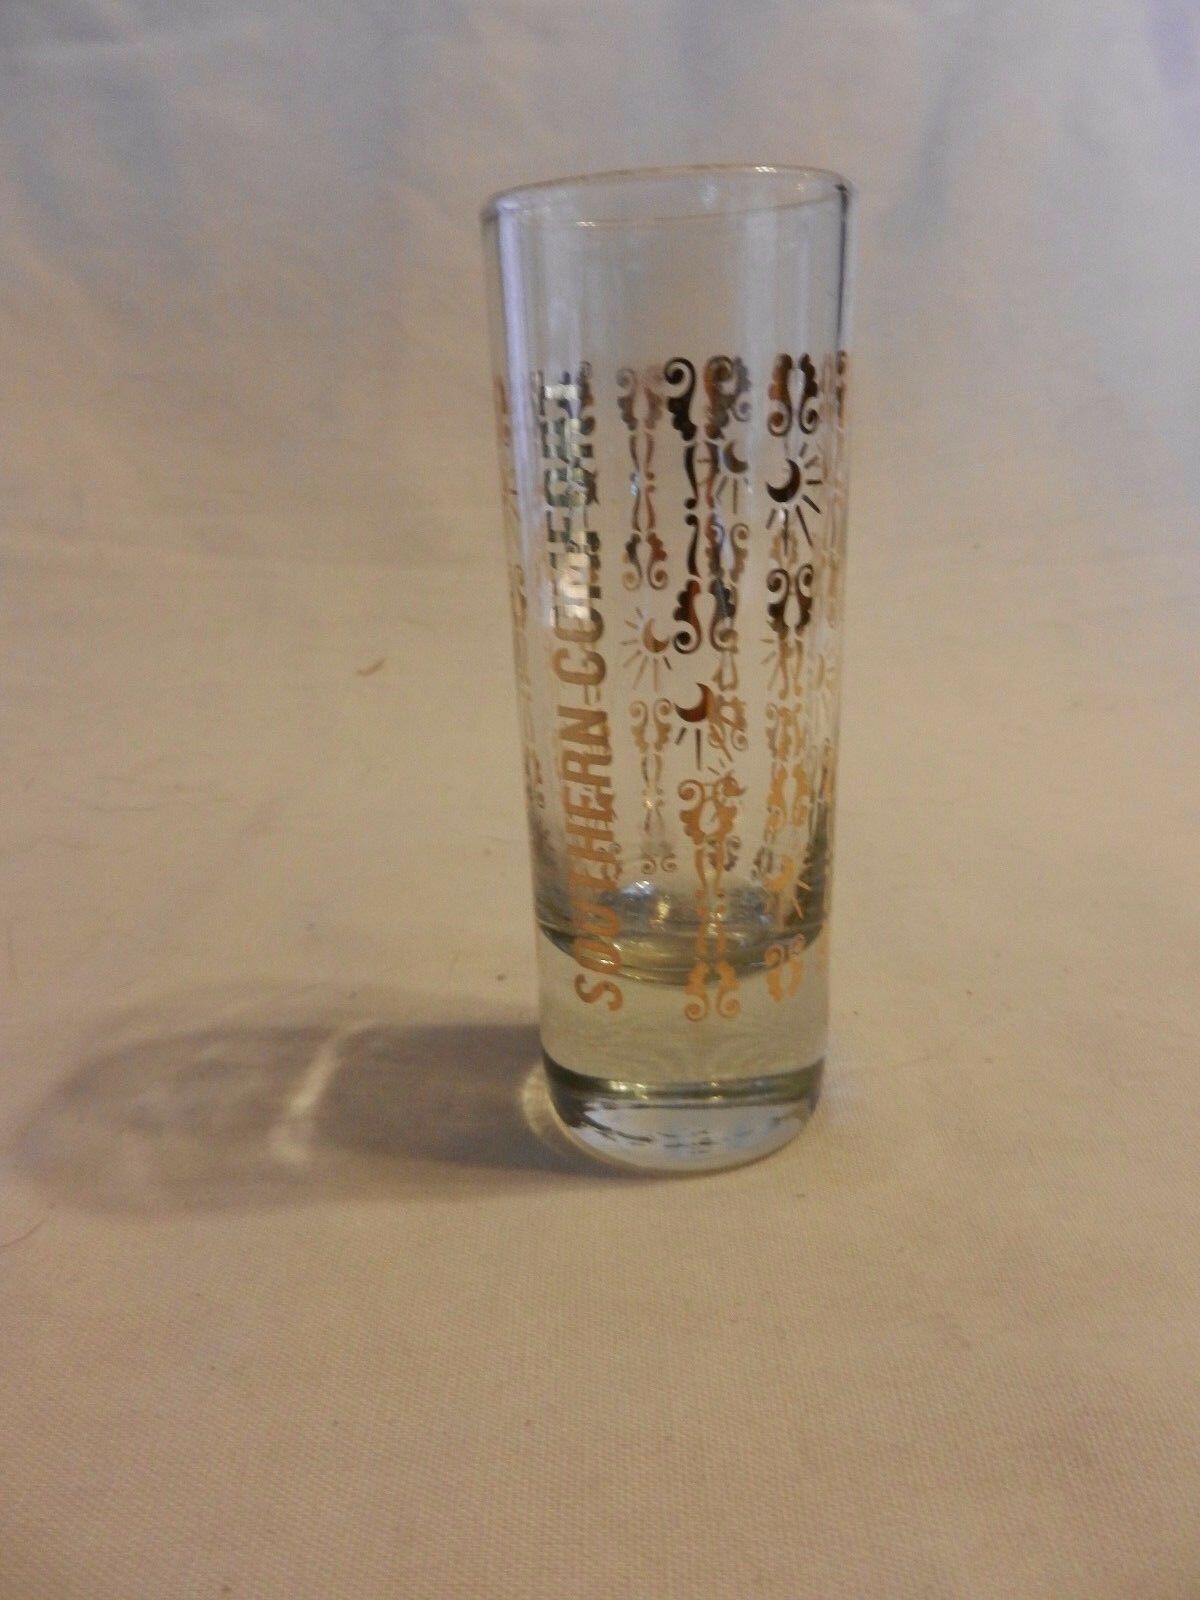 Primary image for Pair of Southern Comfort Shooter Glasses with Logos